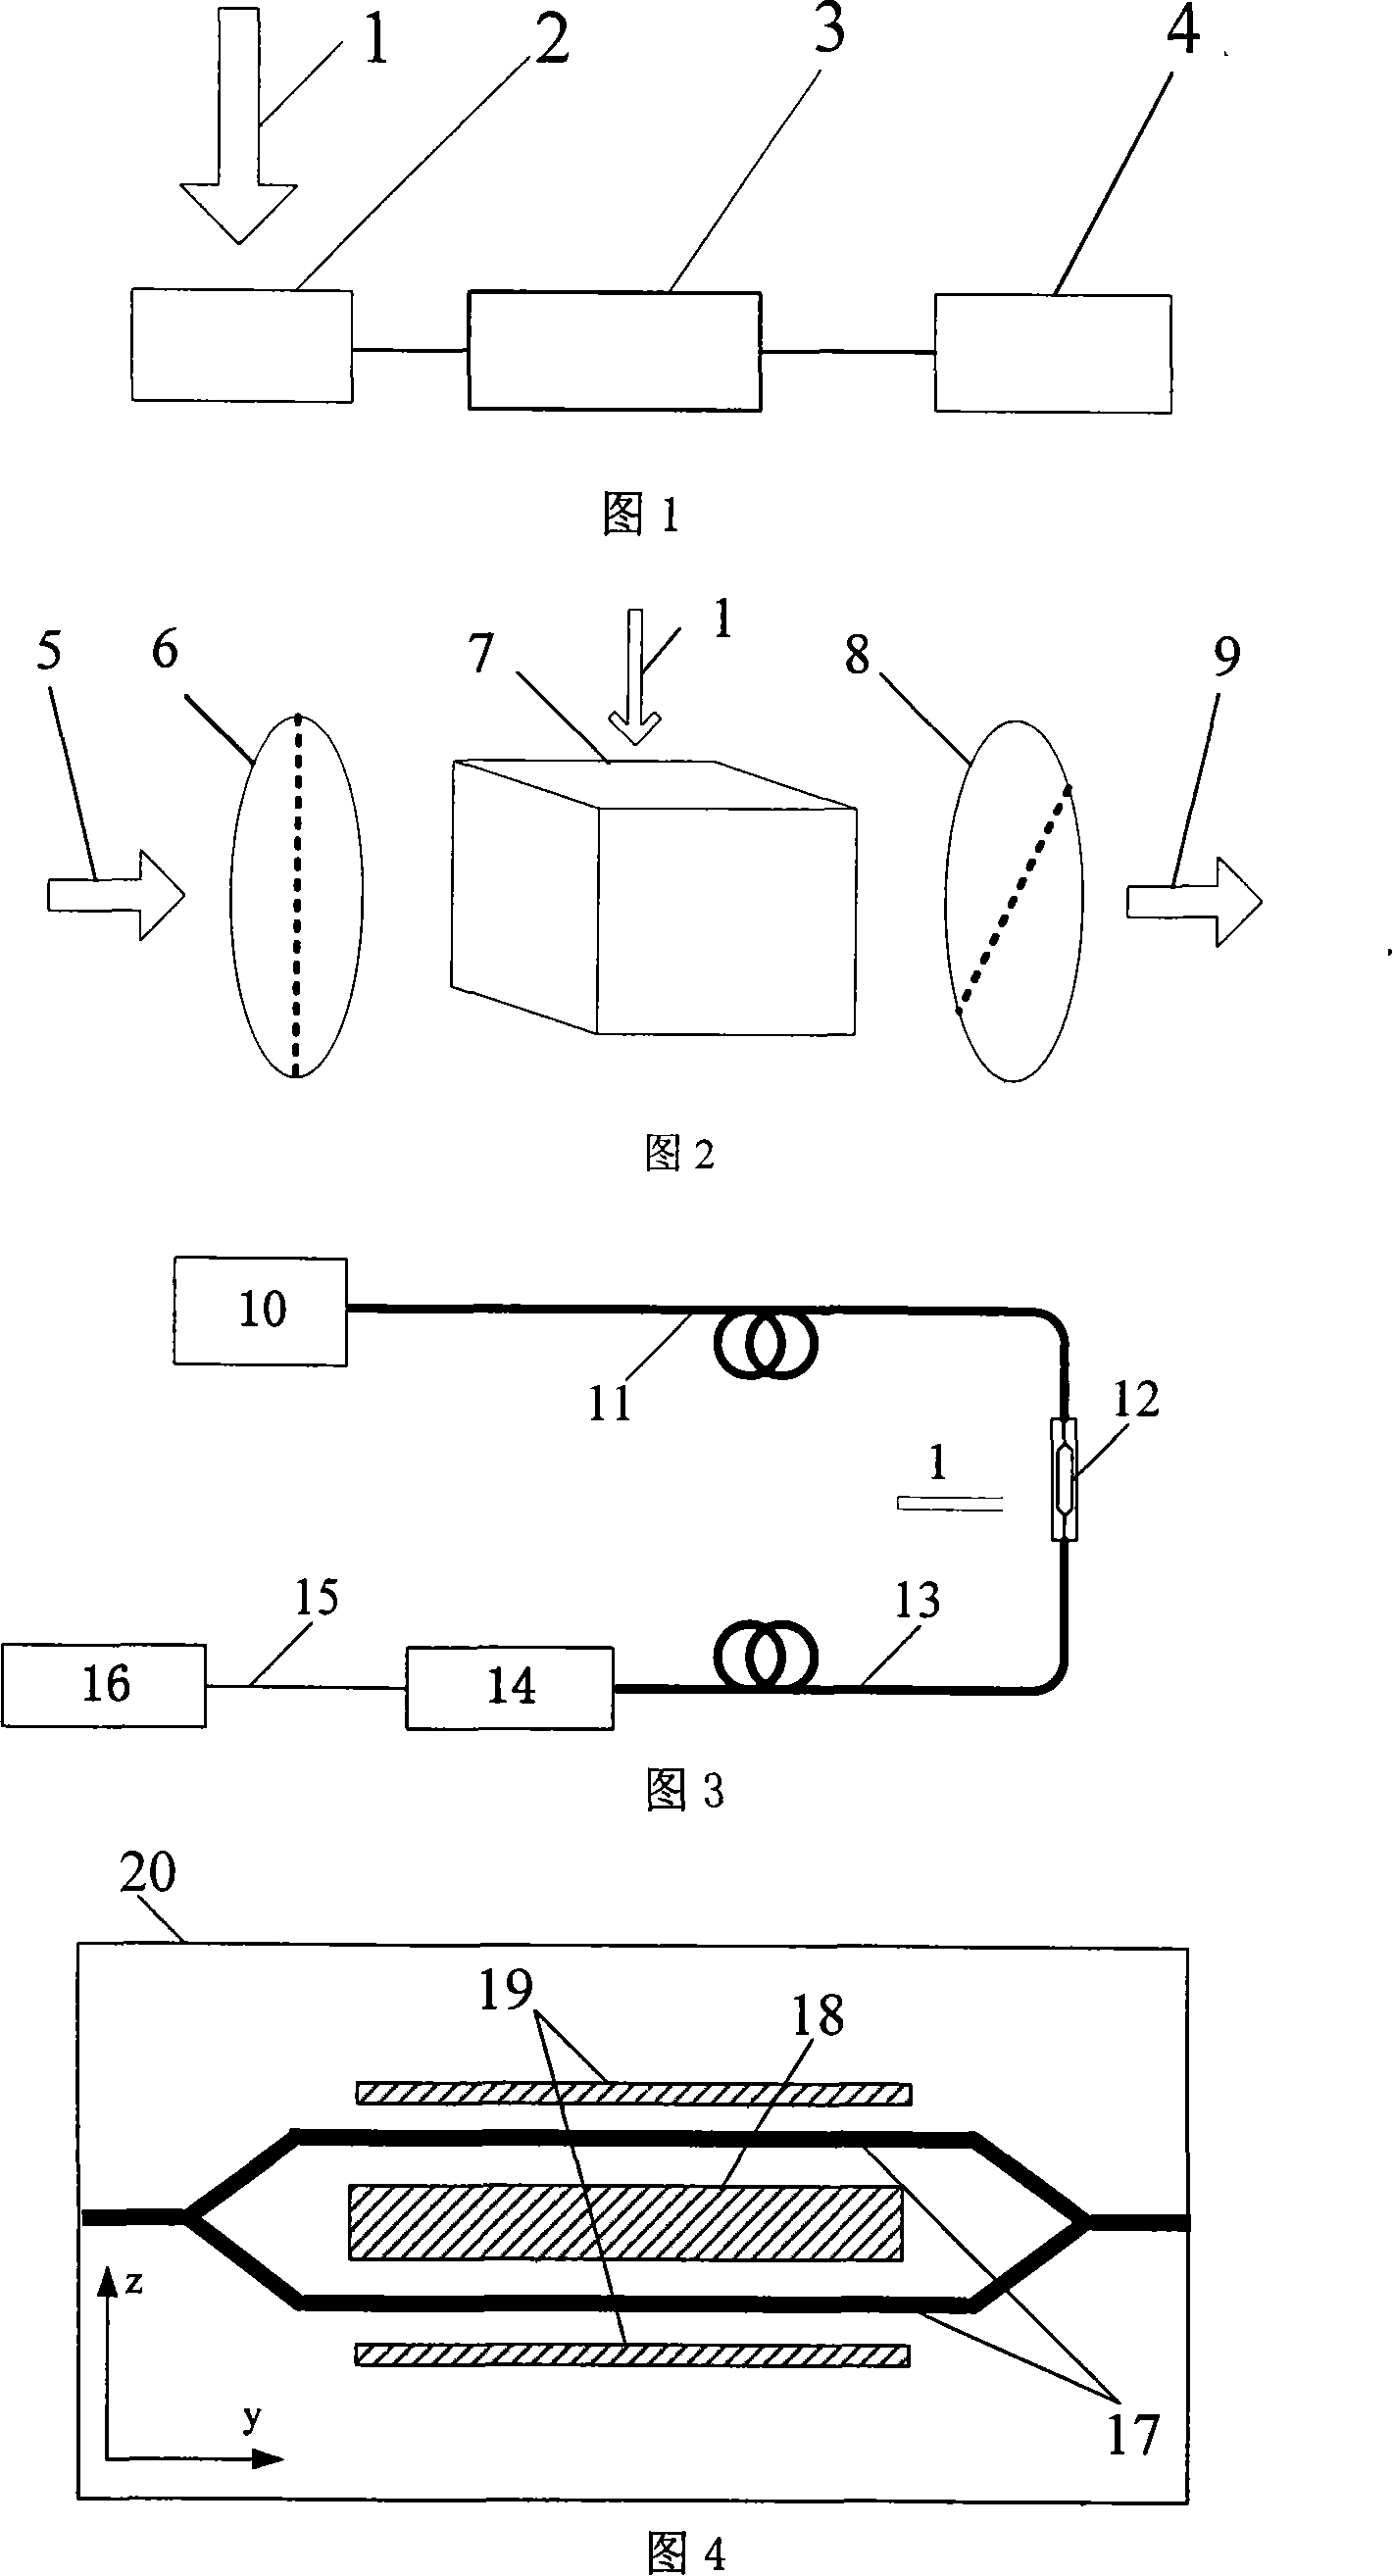 Analog signal separating and transferring system used for high voltage measuring